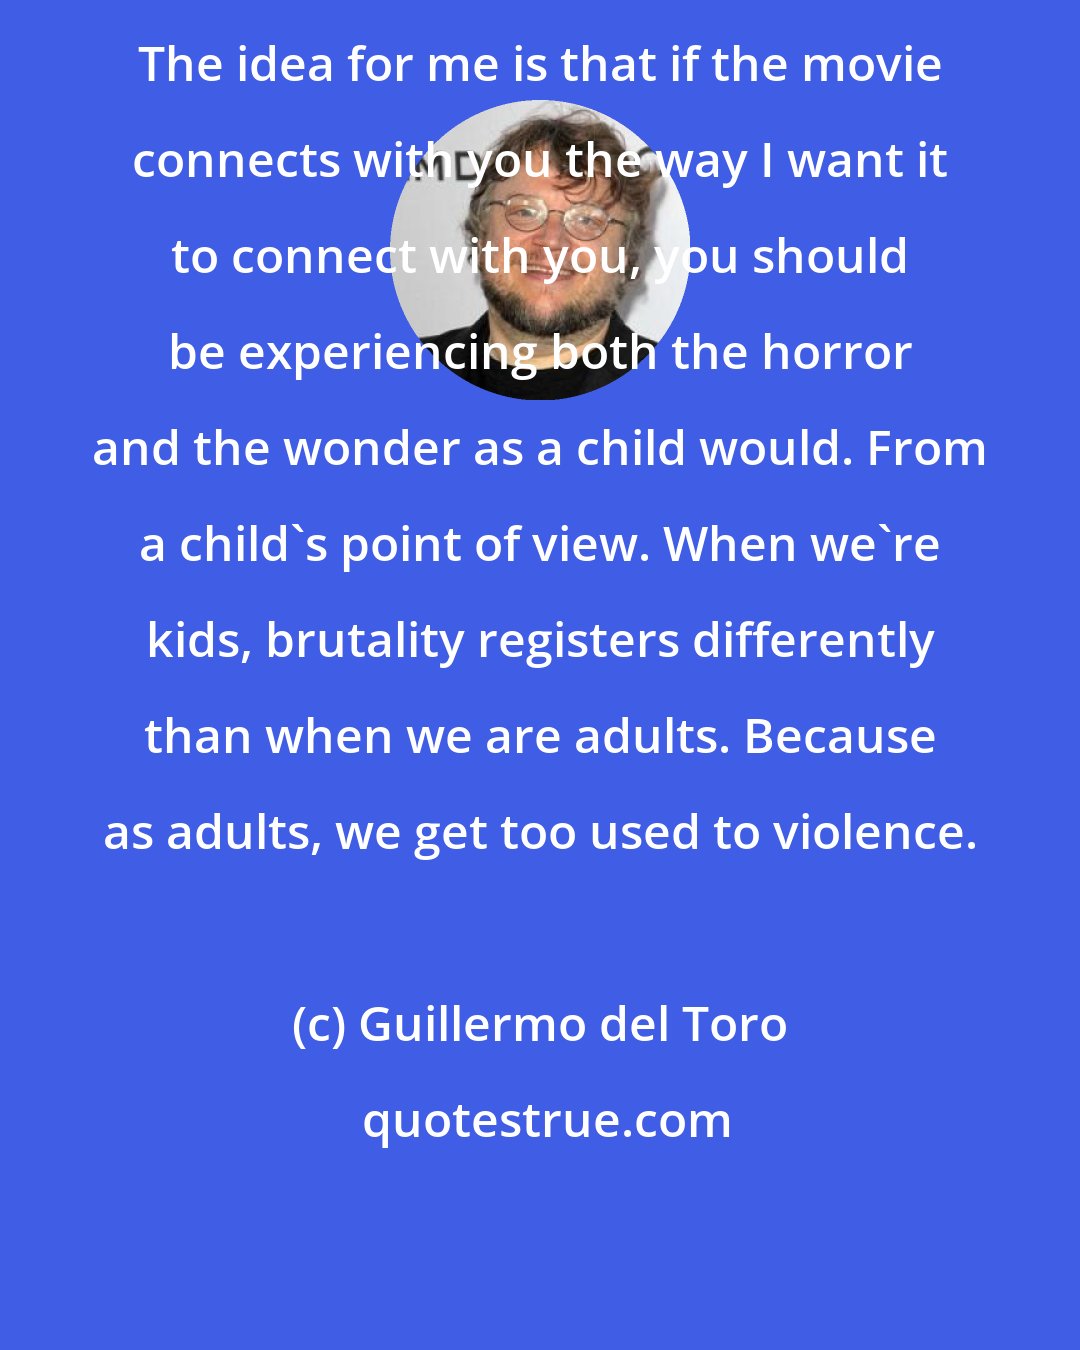 Guillermo del Toro: The idea for me is that if the movie connects with you the way I want it to connect with you, you should be experiencing both the horror and the wonder as a child would. From a child's point of view. When we're kids, brutality registers differently than when we are adults. Because as adults, we get too used to violence.